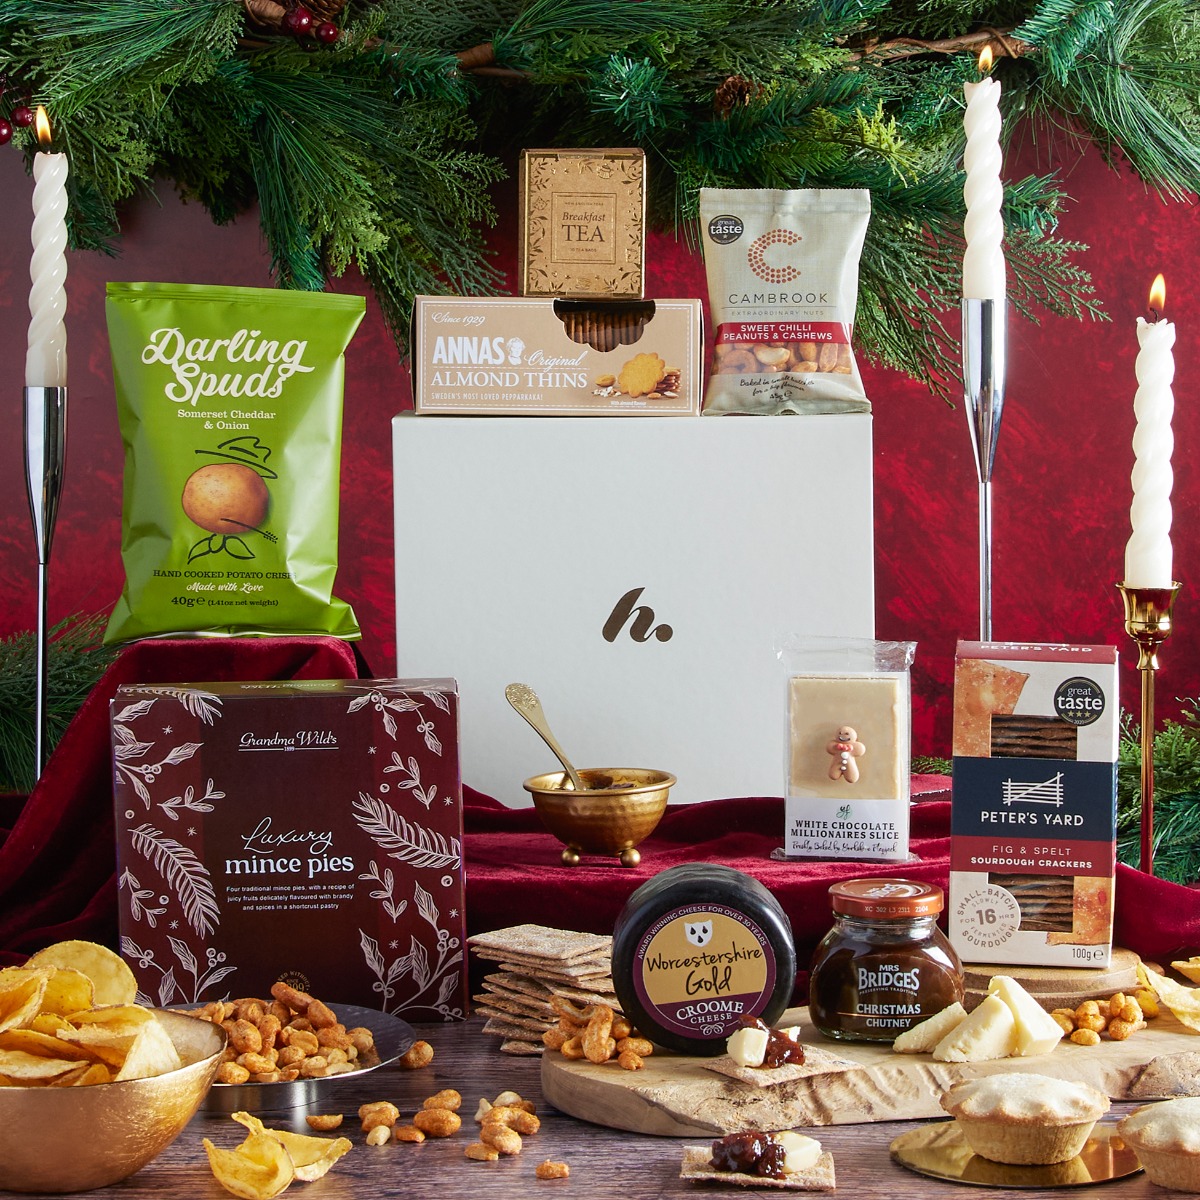 The Christmas Season Selection Gift Box with contents on display as a recommended Christmas cheese gift